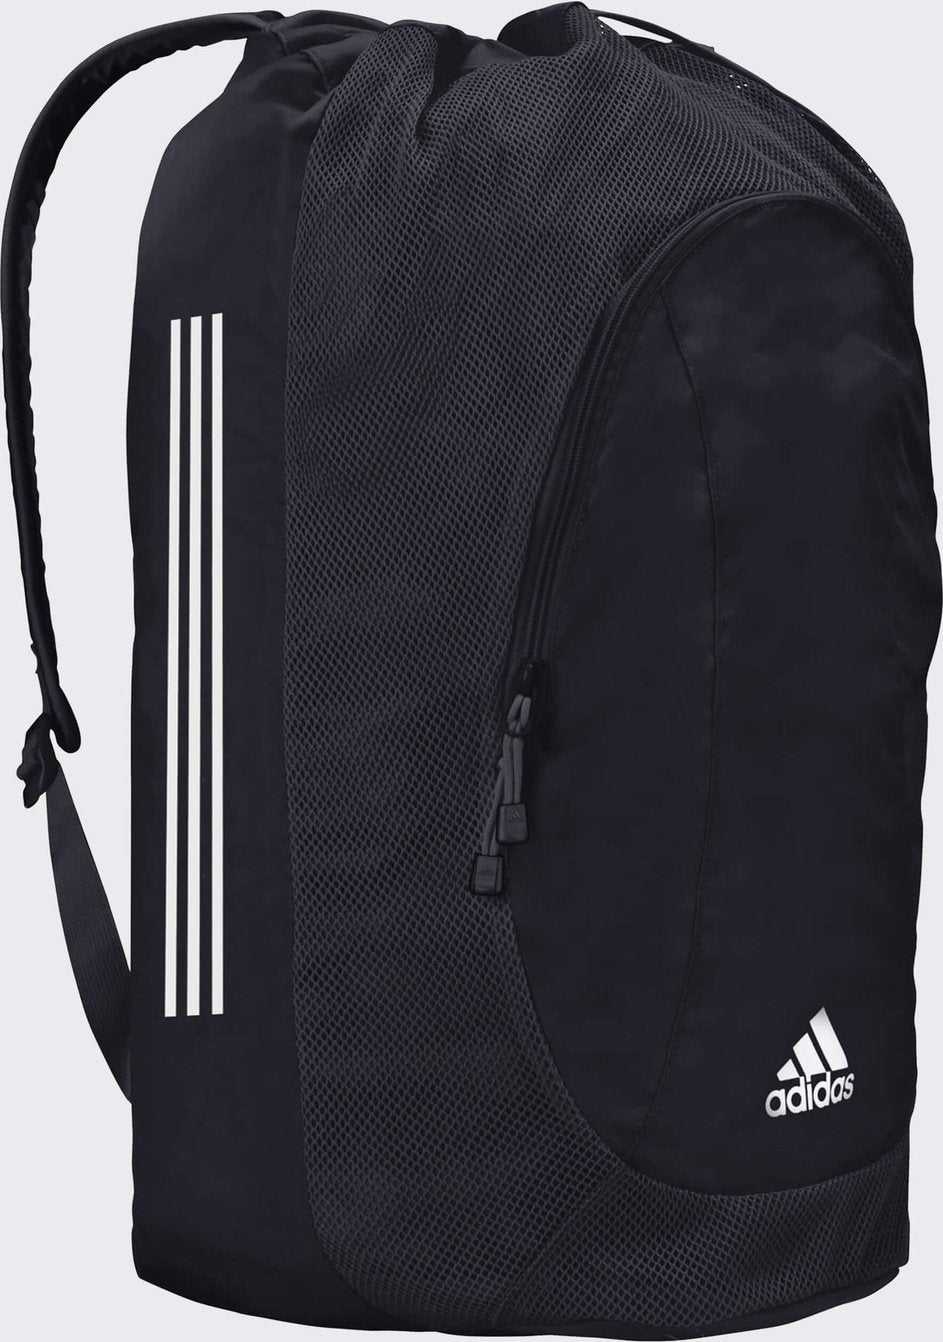 Adidas aA5147205 Wrestling Gear Bag - Black White - HIT a Double - 1